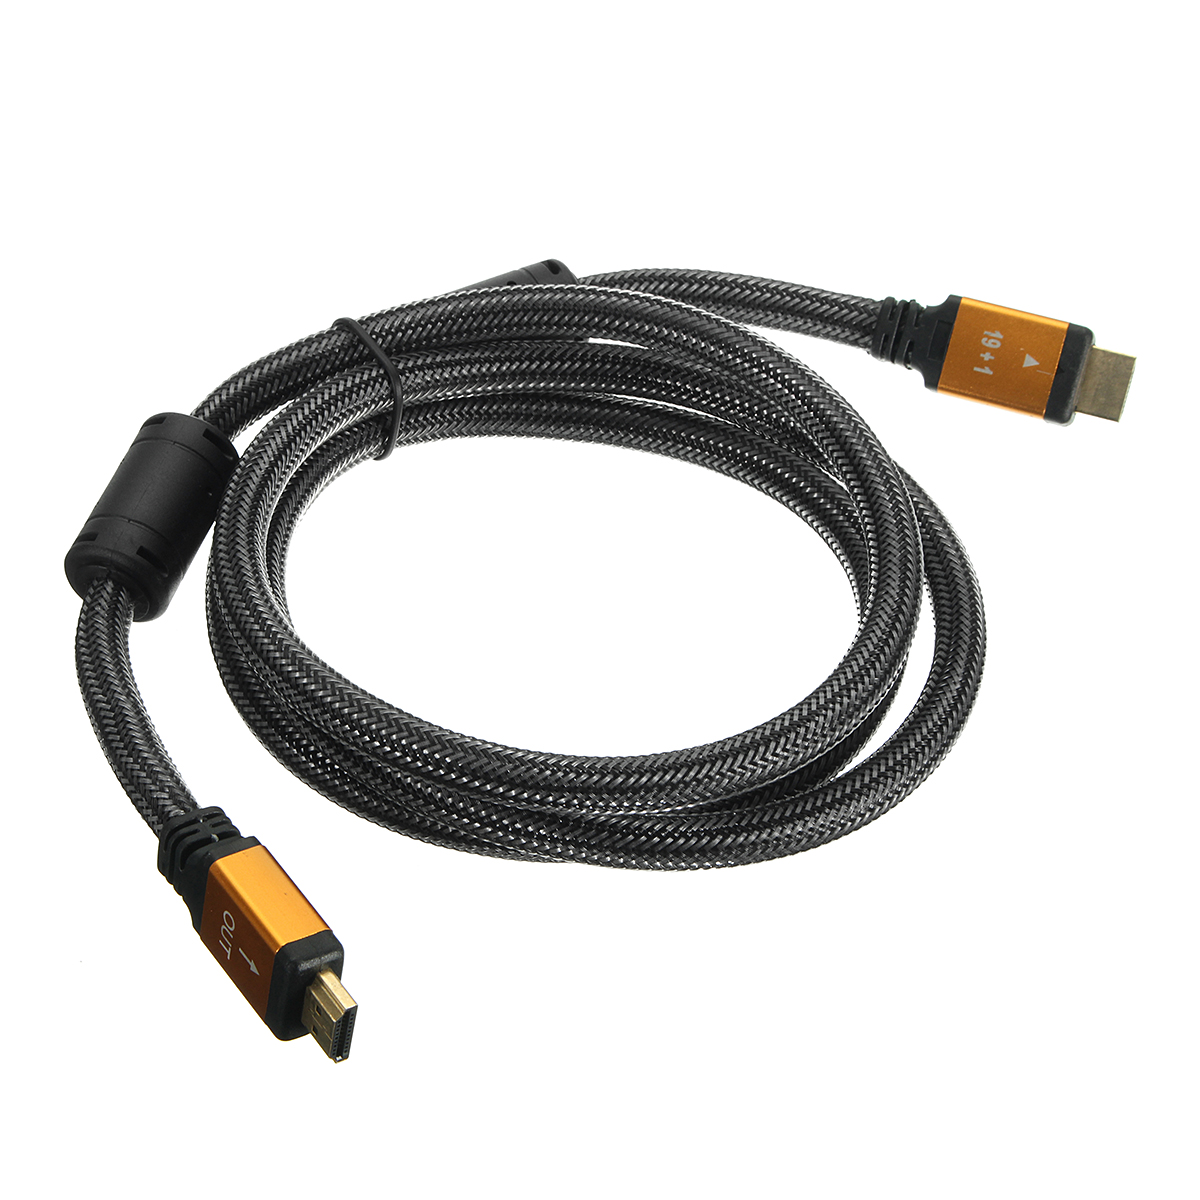 15M-3D-Orange-HD-Cable-Lead-V20-Gold-High-Speed-for-HDTV-Ultra-Hd-HD-2160p-4K-1131620-1